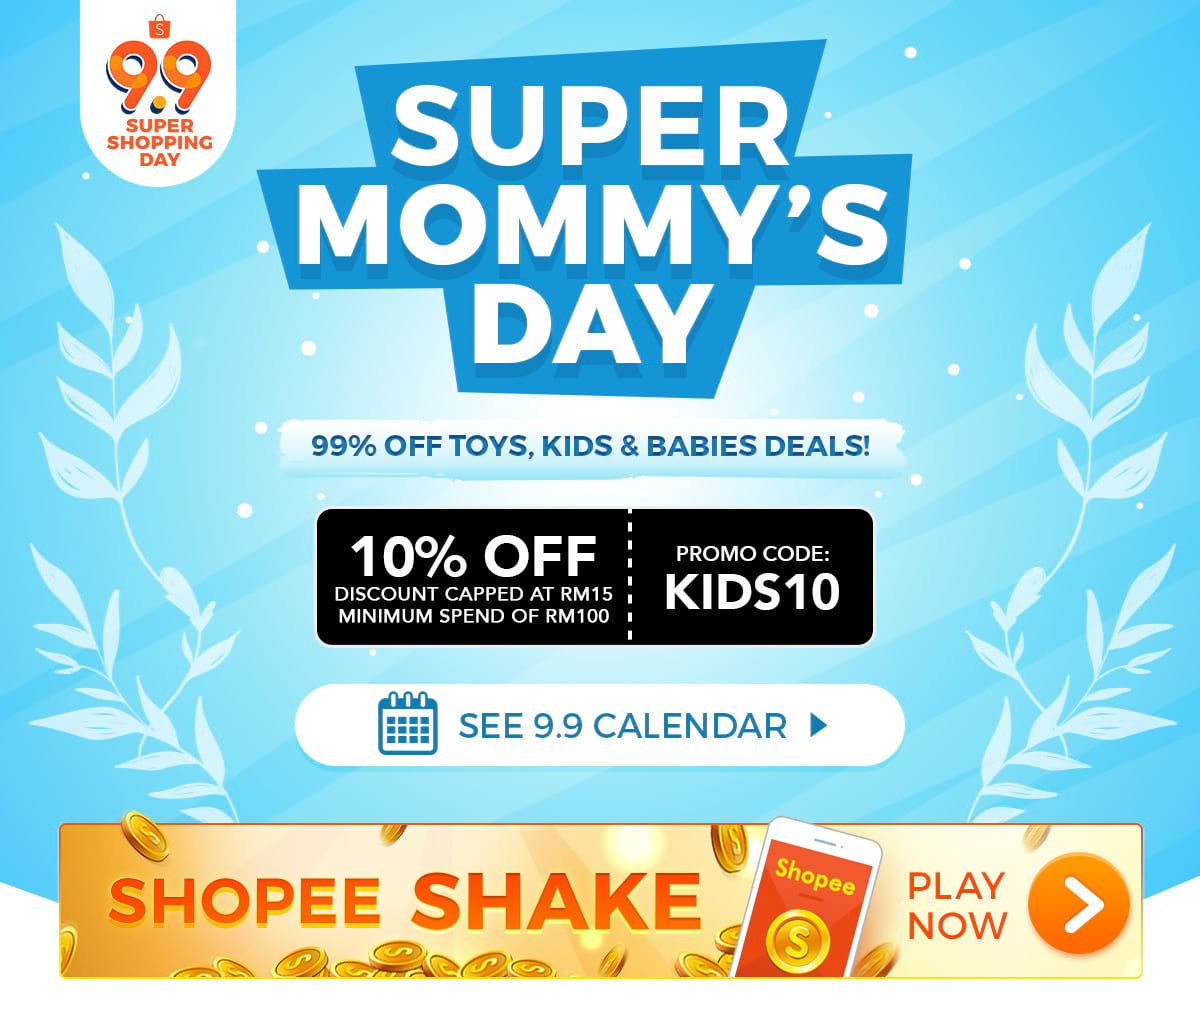 9.9 Super Mommy's Day, Up to 99% OFF Kids & Babies